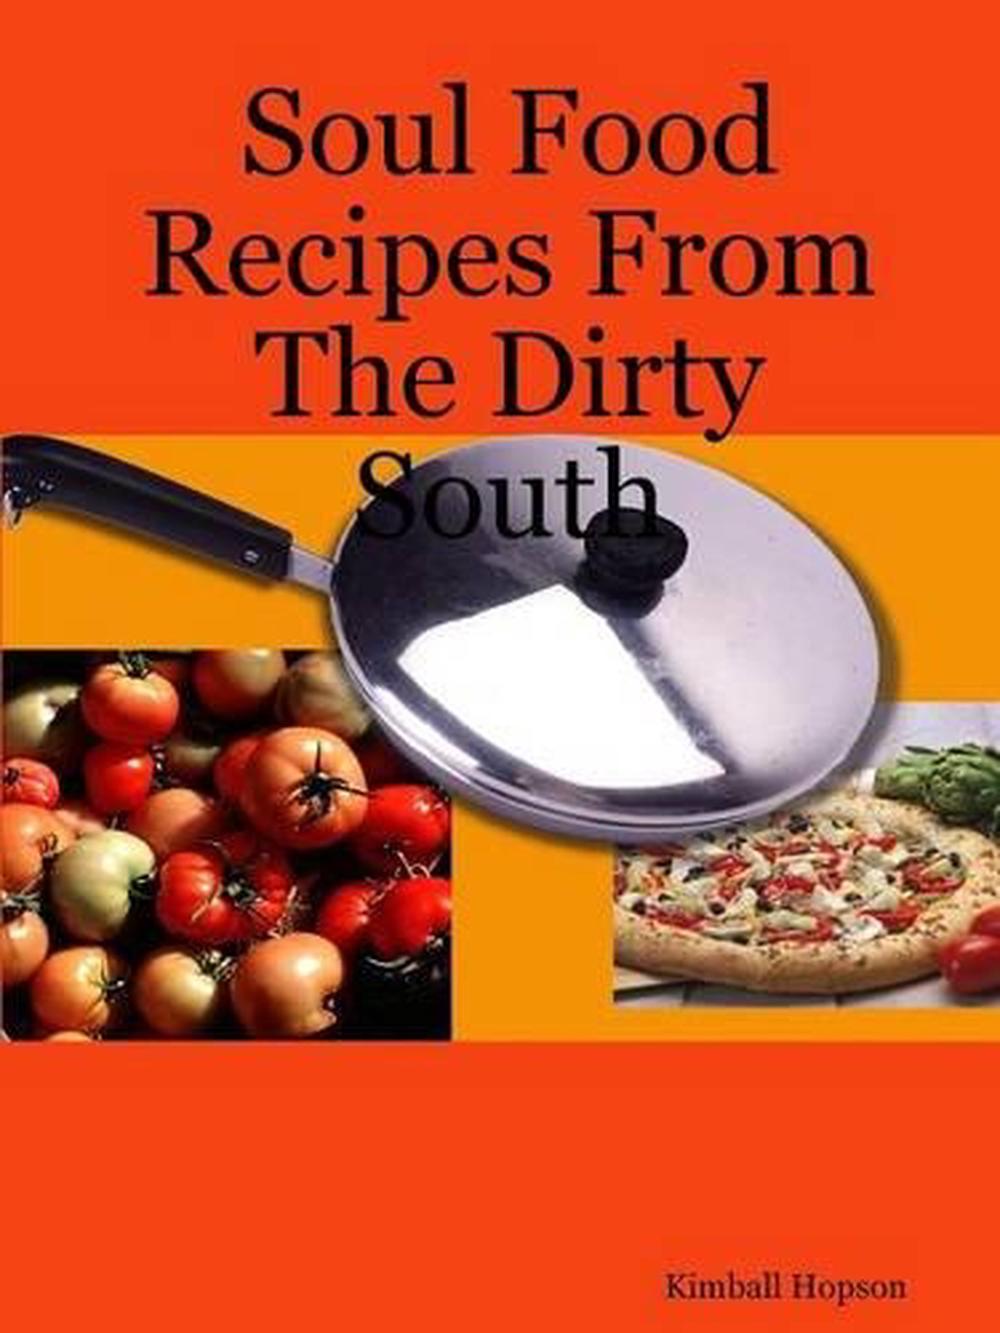 Soul Food Recipes From The Dirty South by Kimball Hopson ...